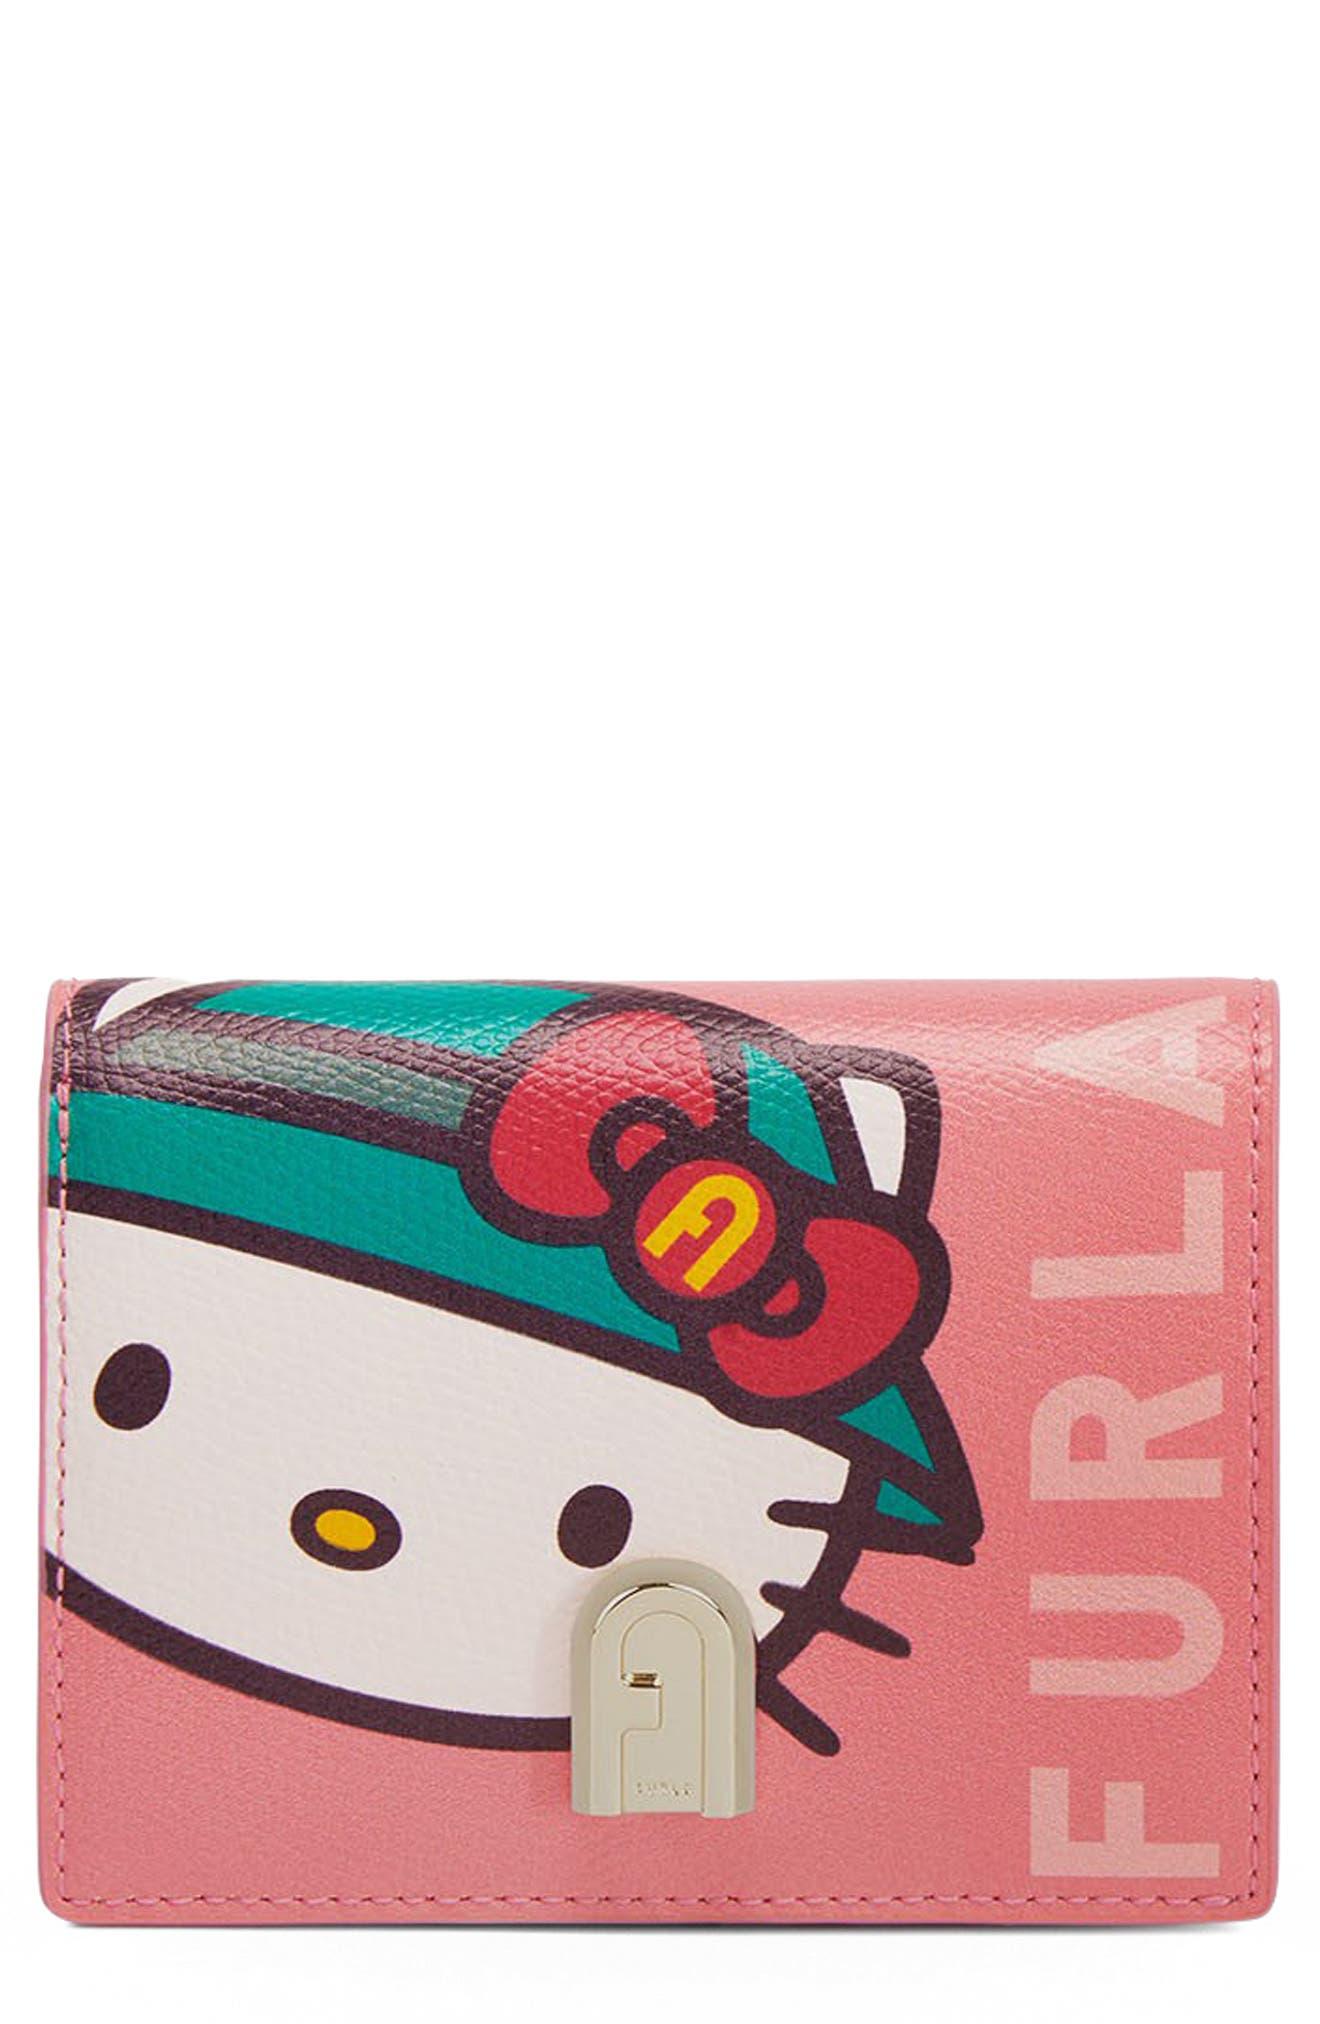 Hello Kitty Leather Wallets for Women